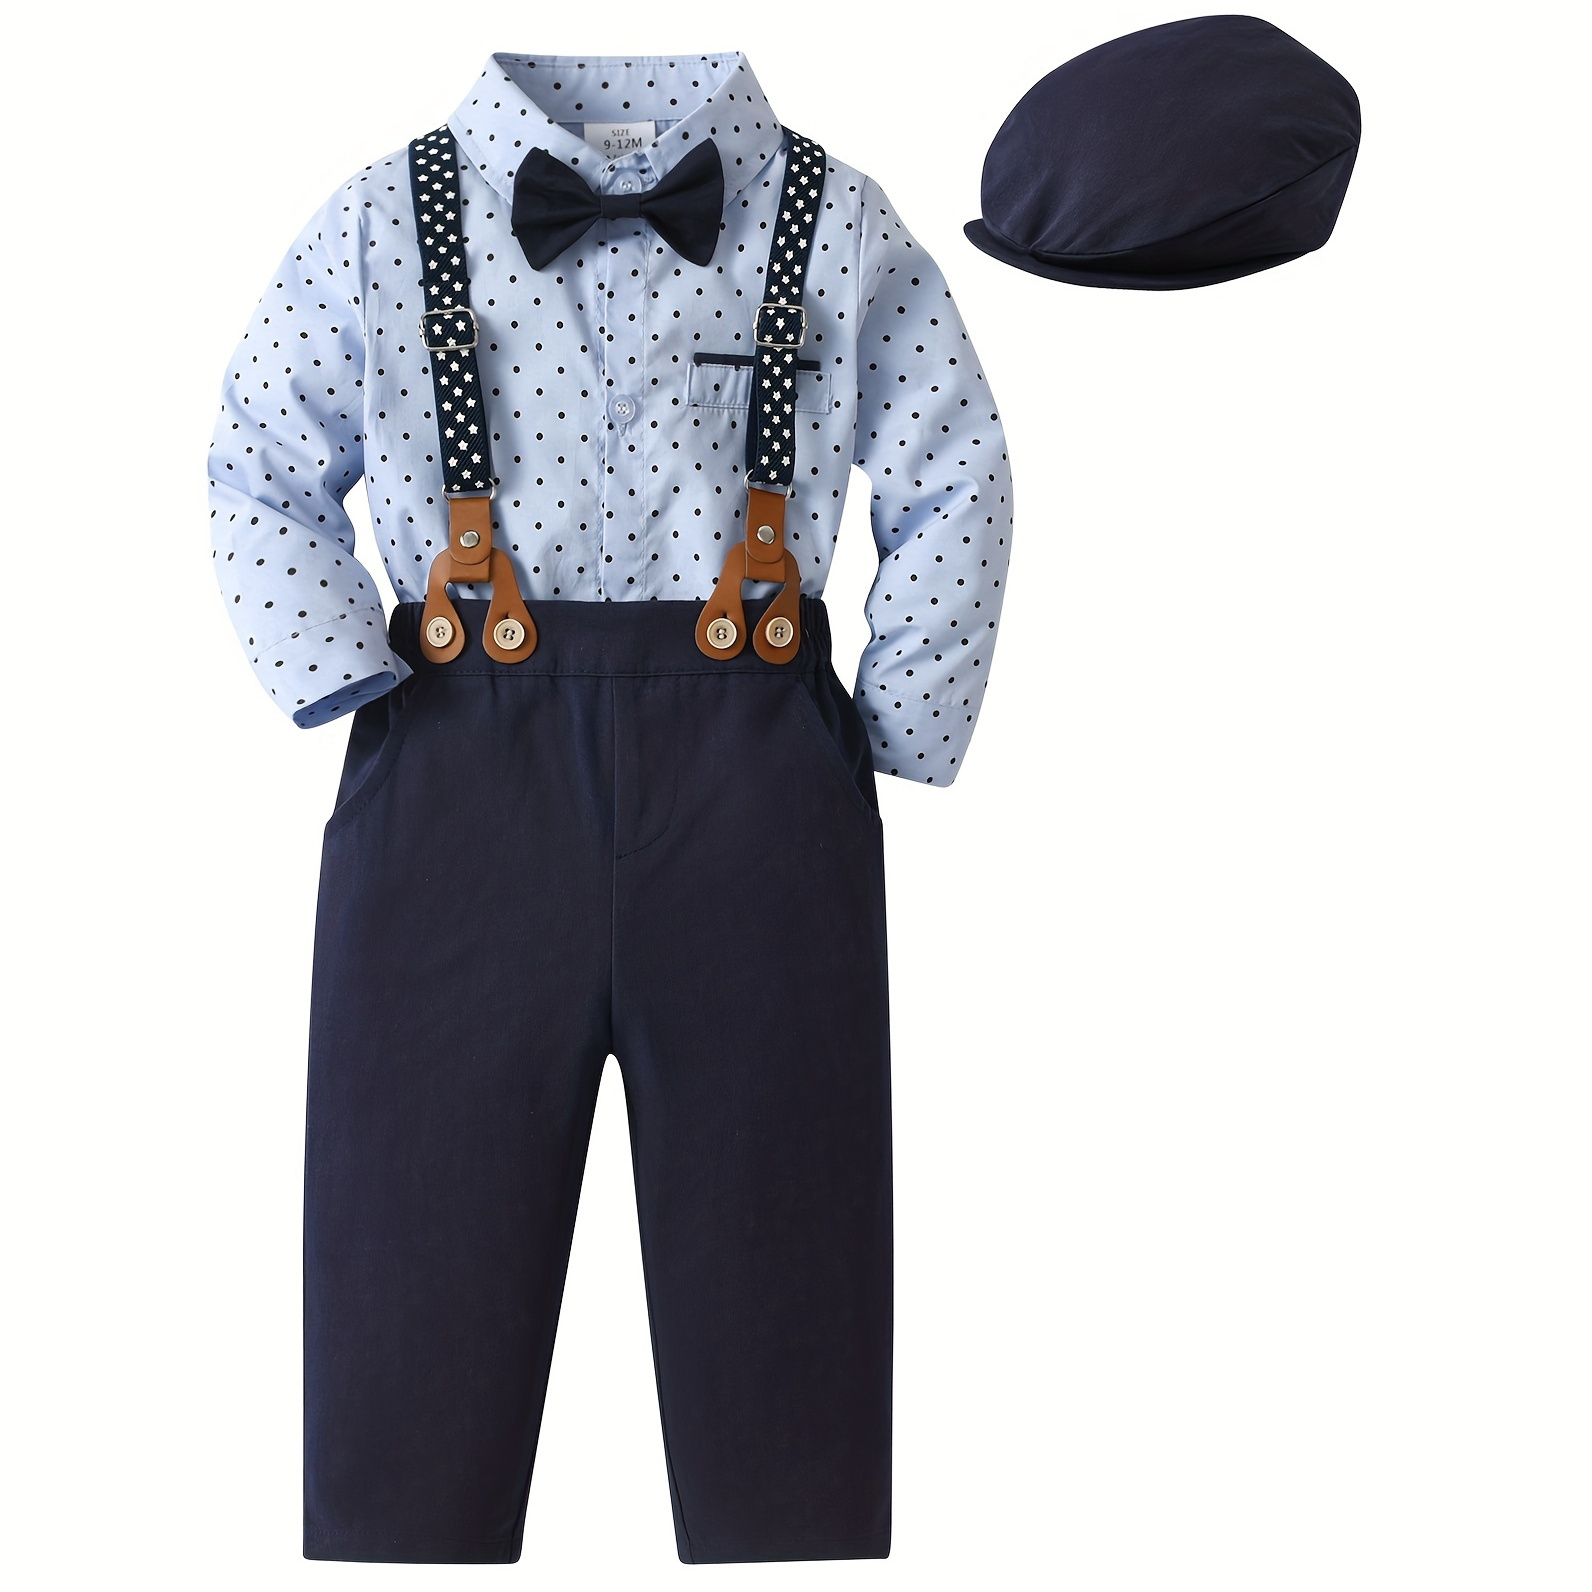 

Polka Dots Pattern Gentleman Outfit For Infant & Toddler, Bowtie Bodysuit & Hat & Bib Pants Set, Formal Wear For Photography Birthday Party, Baby Boy's Clothes